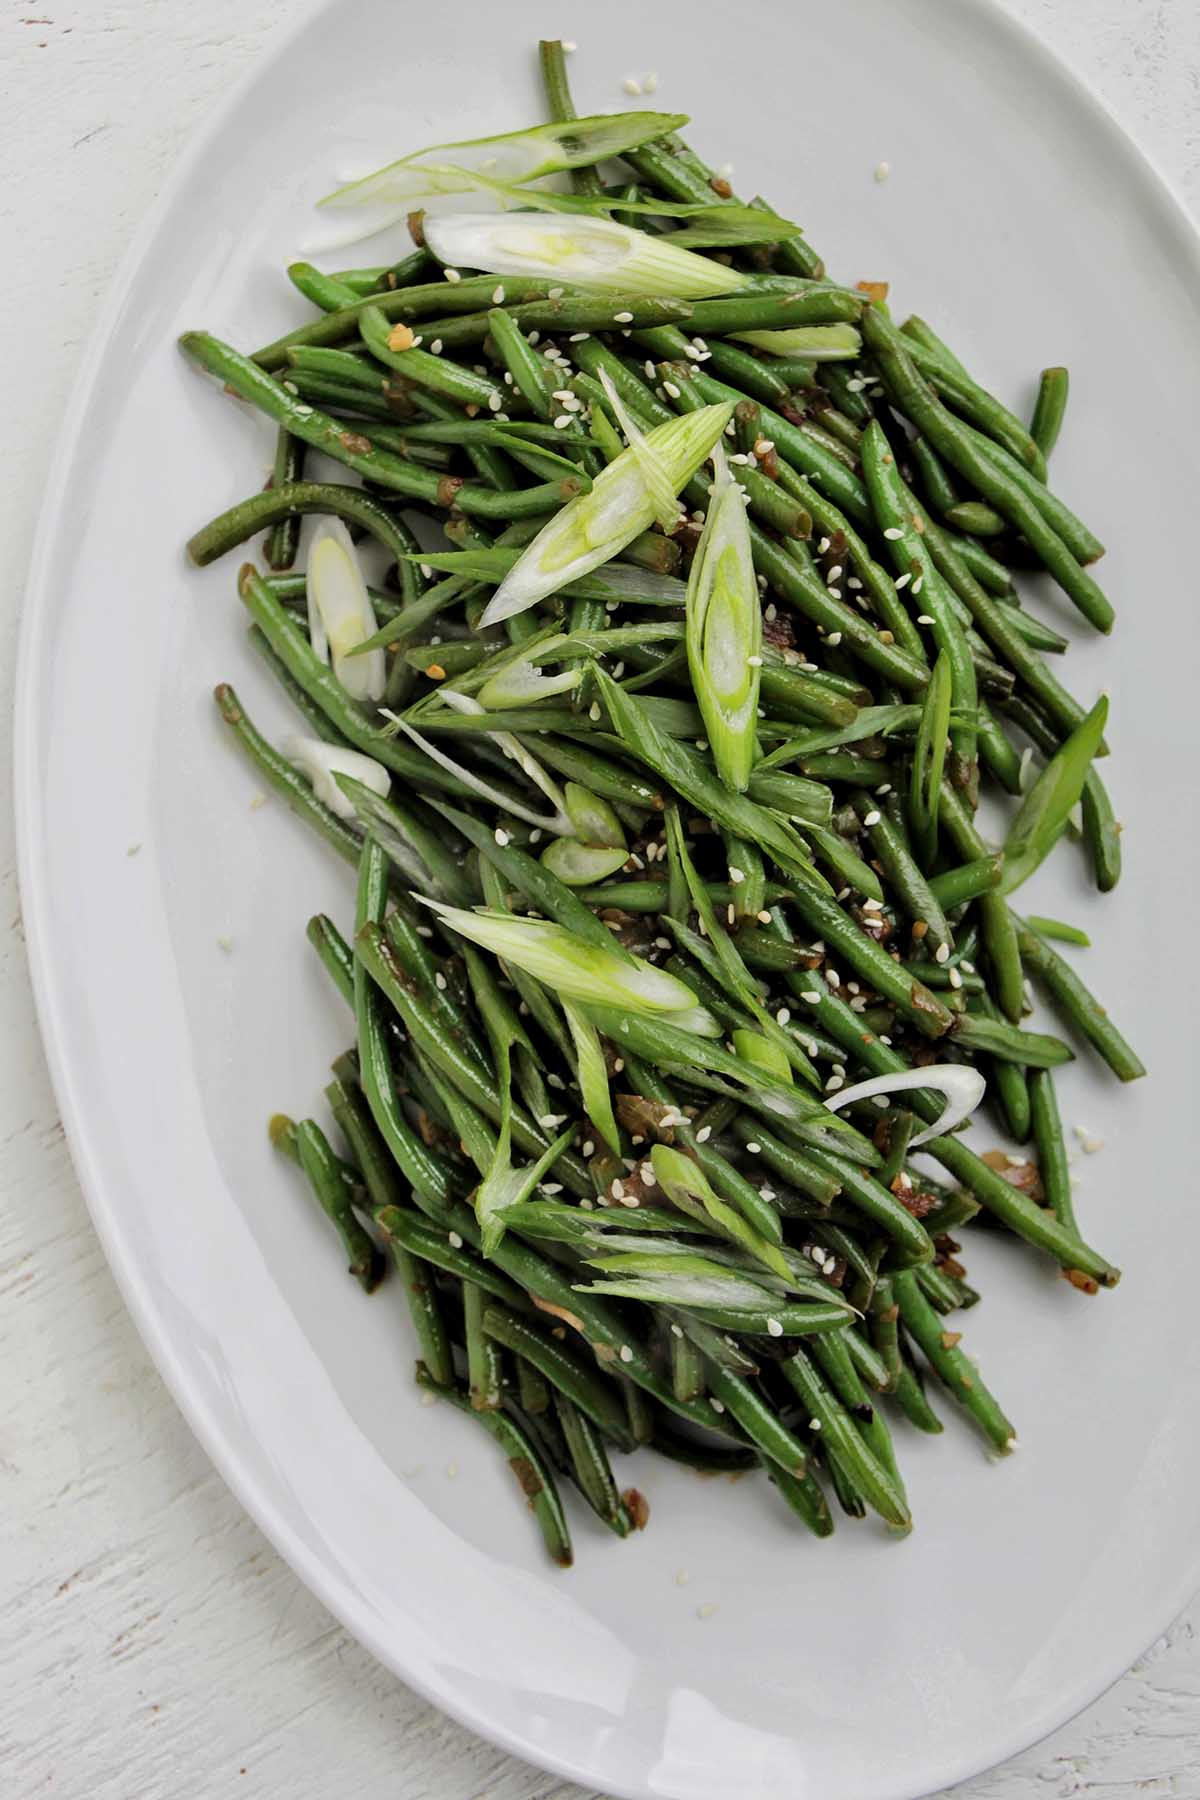 sautéed green beans garnished with green onions and sesame seeds.